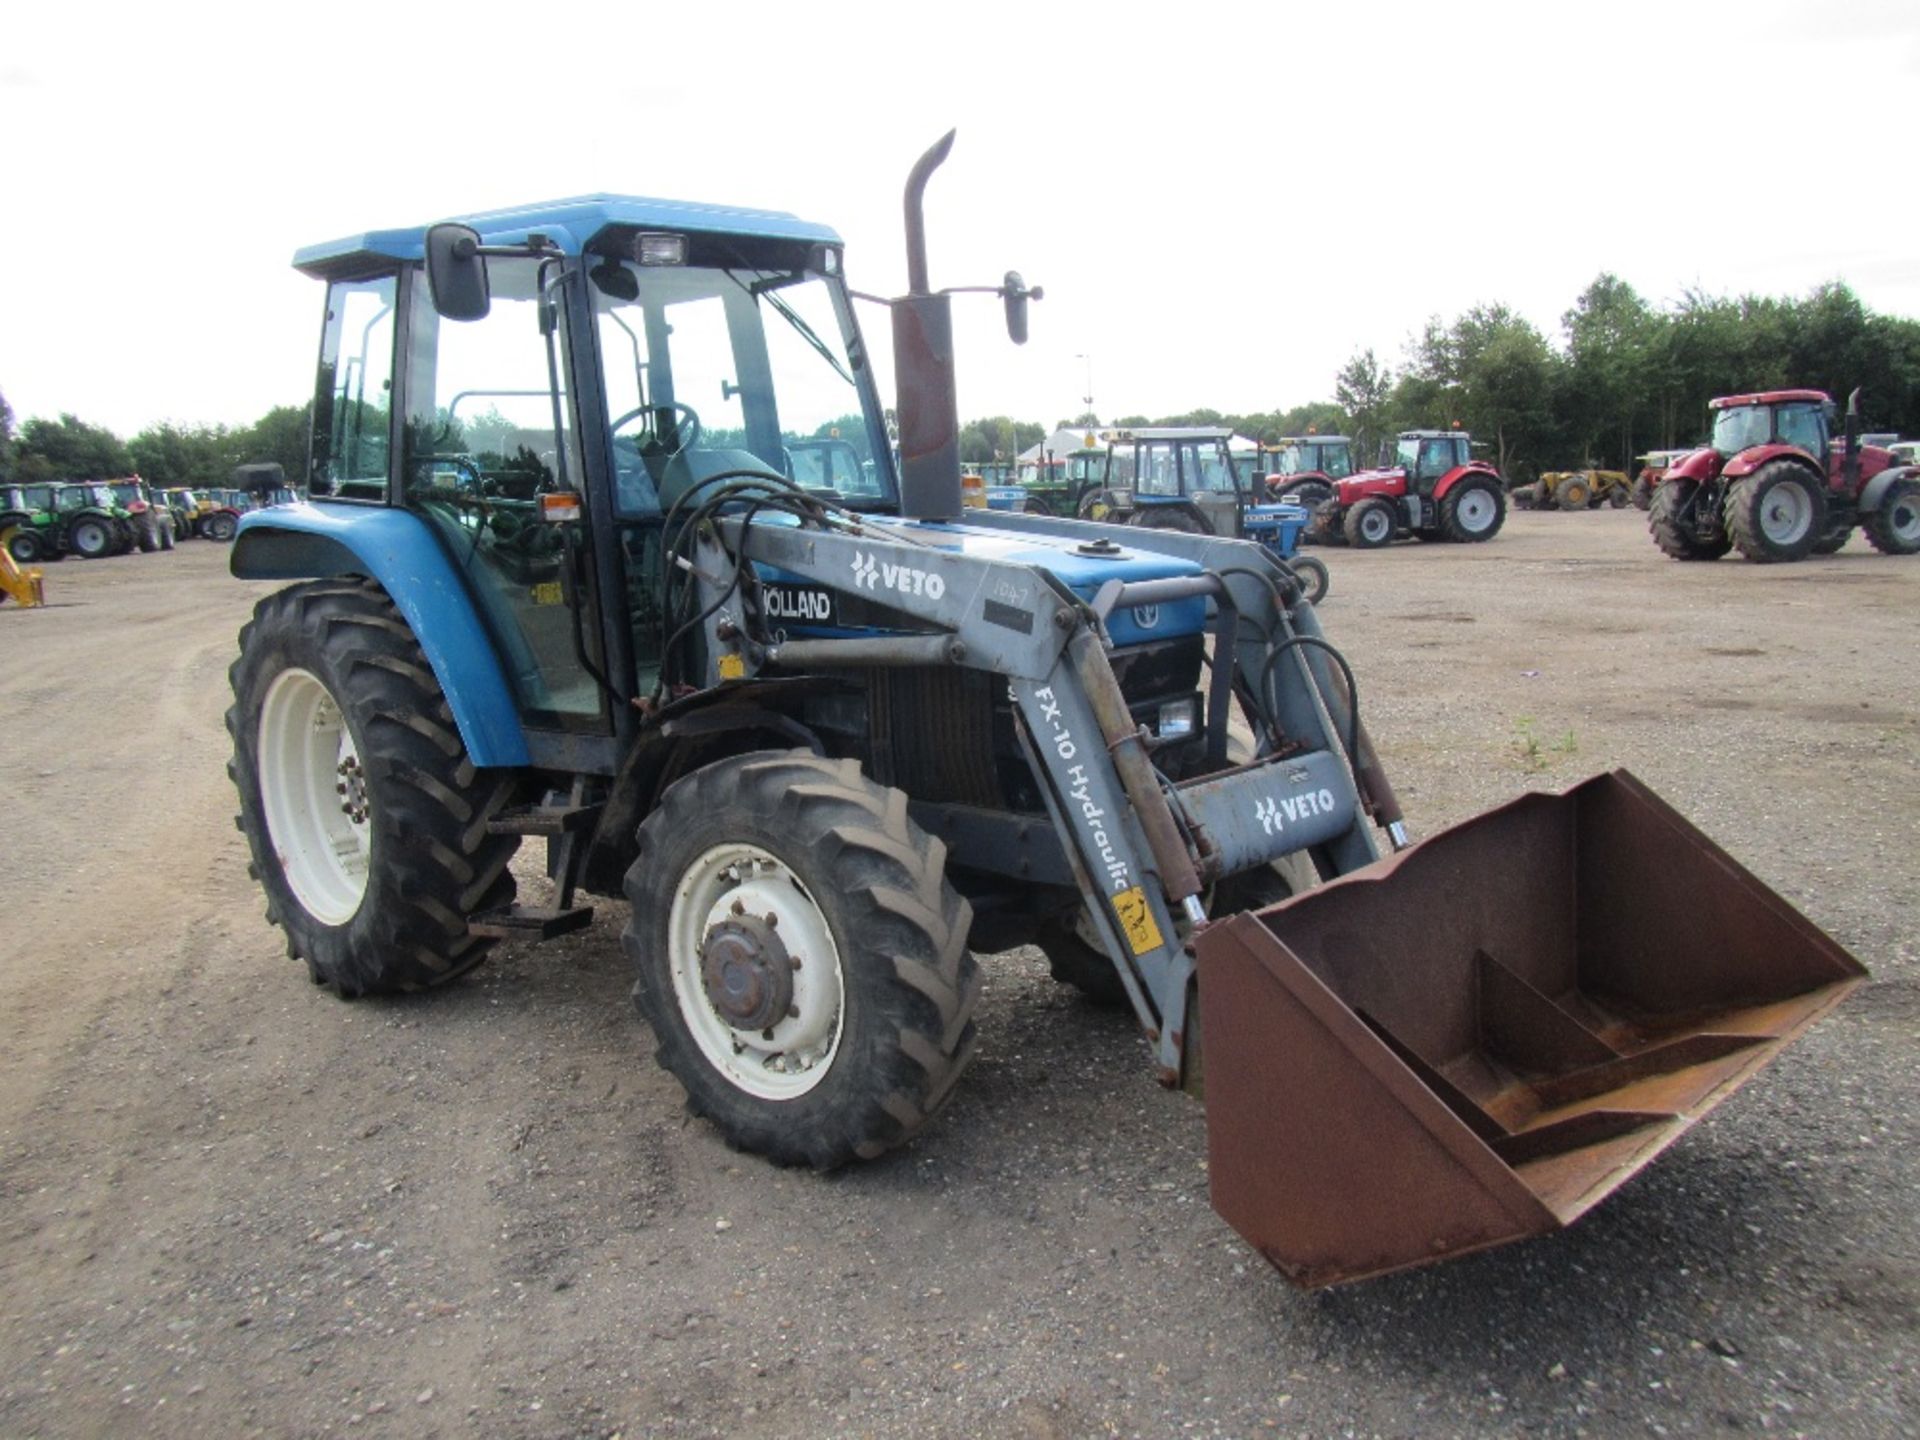 New Holland 5640SL Tractor with Front Loader. V5 has been applied for. Regd 30/1/97. - Image 3 of 15